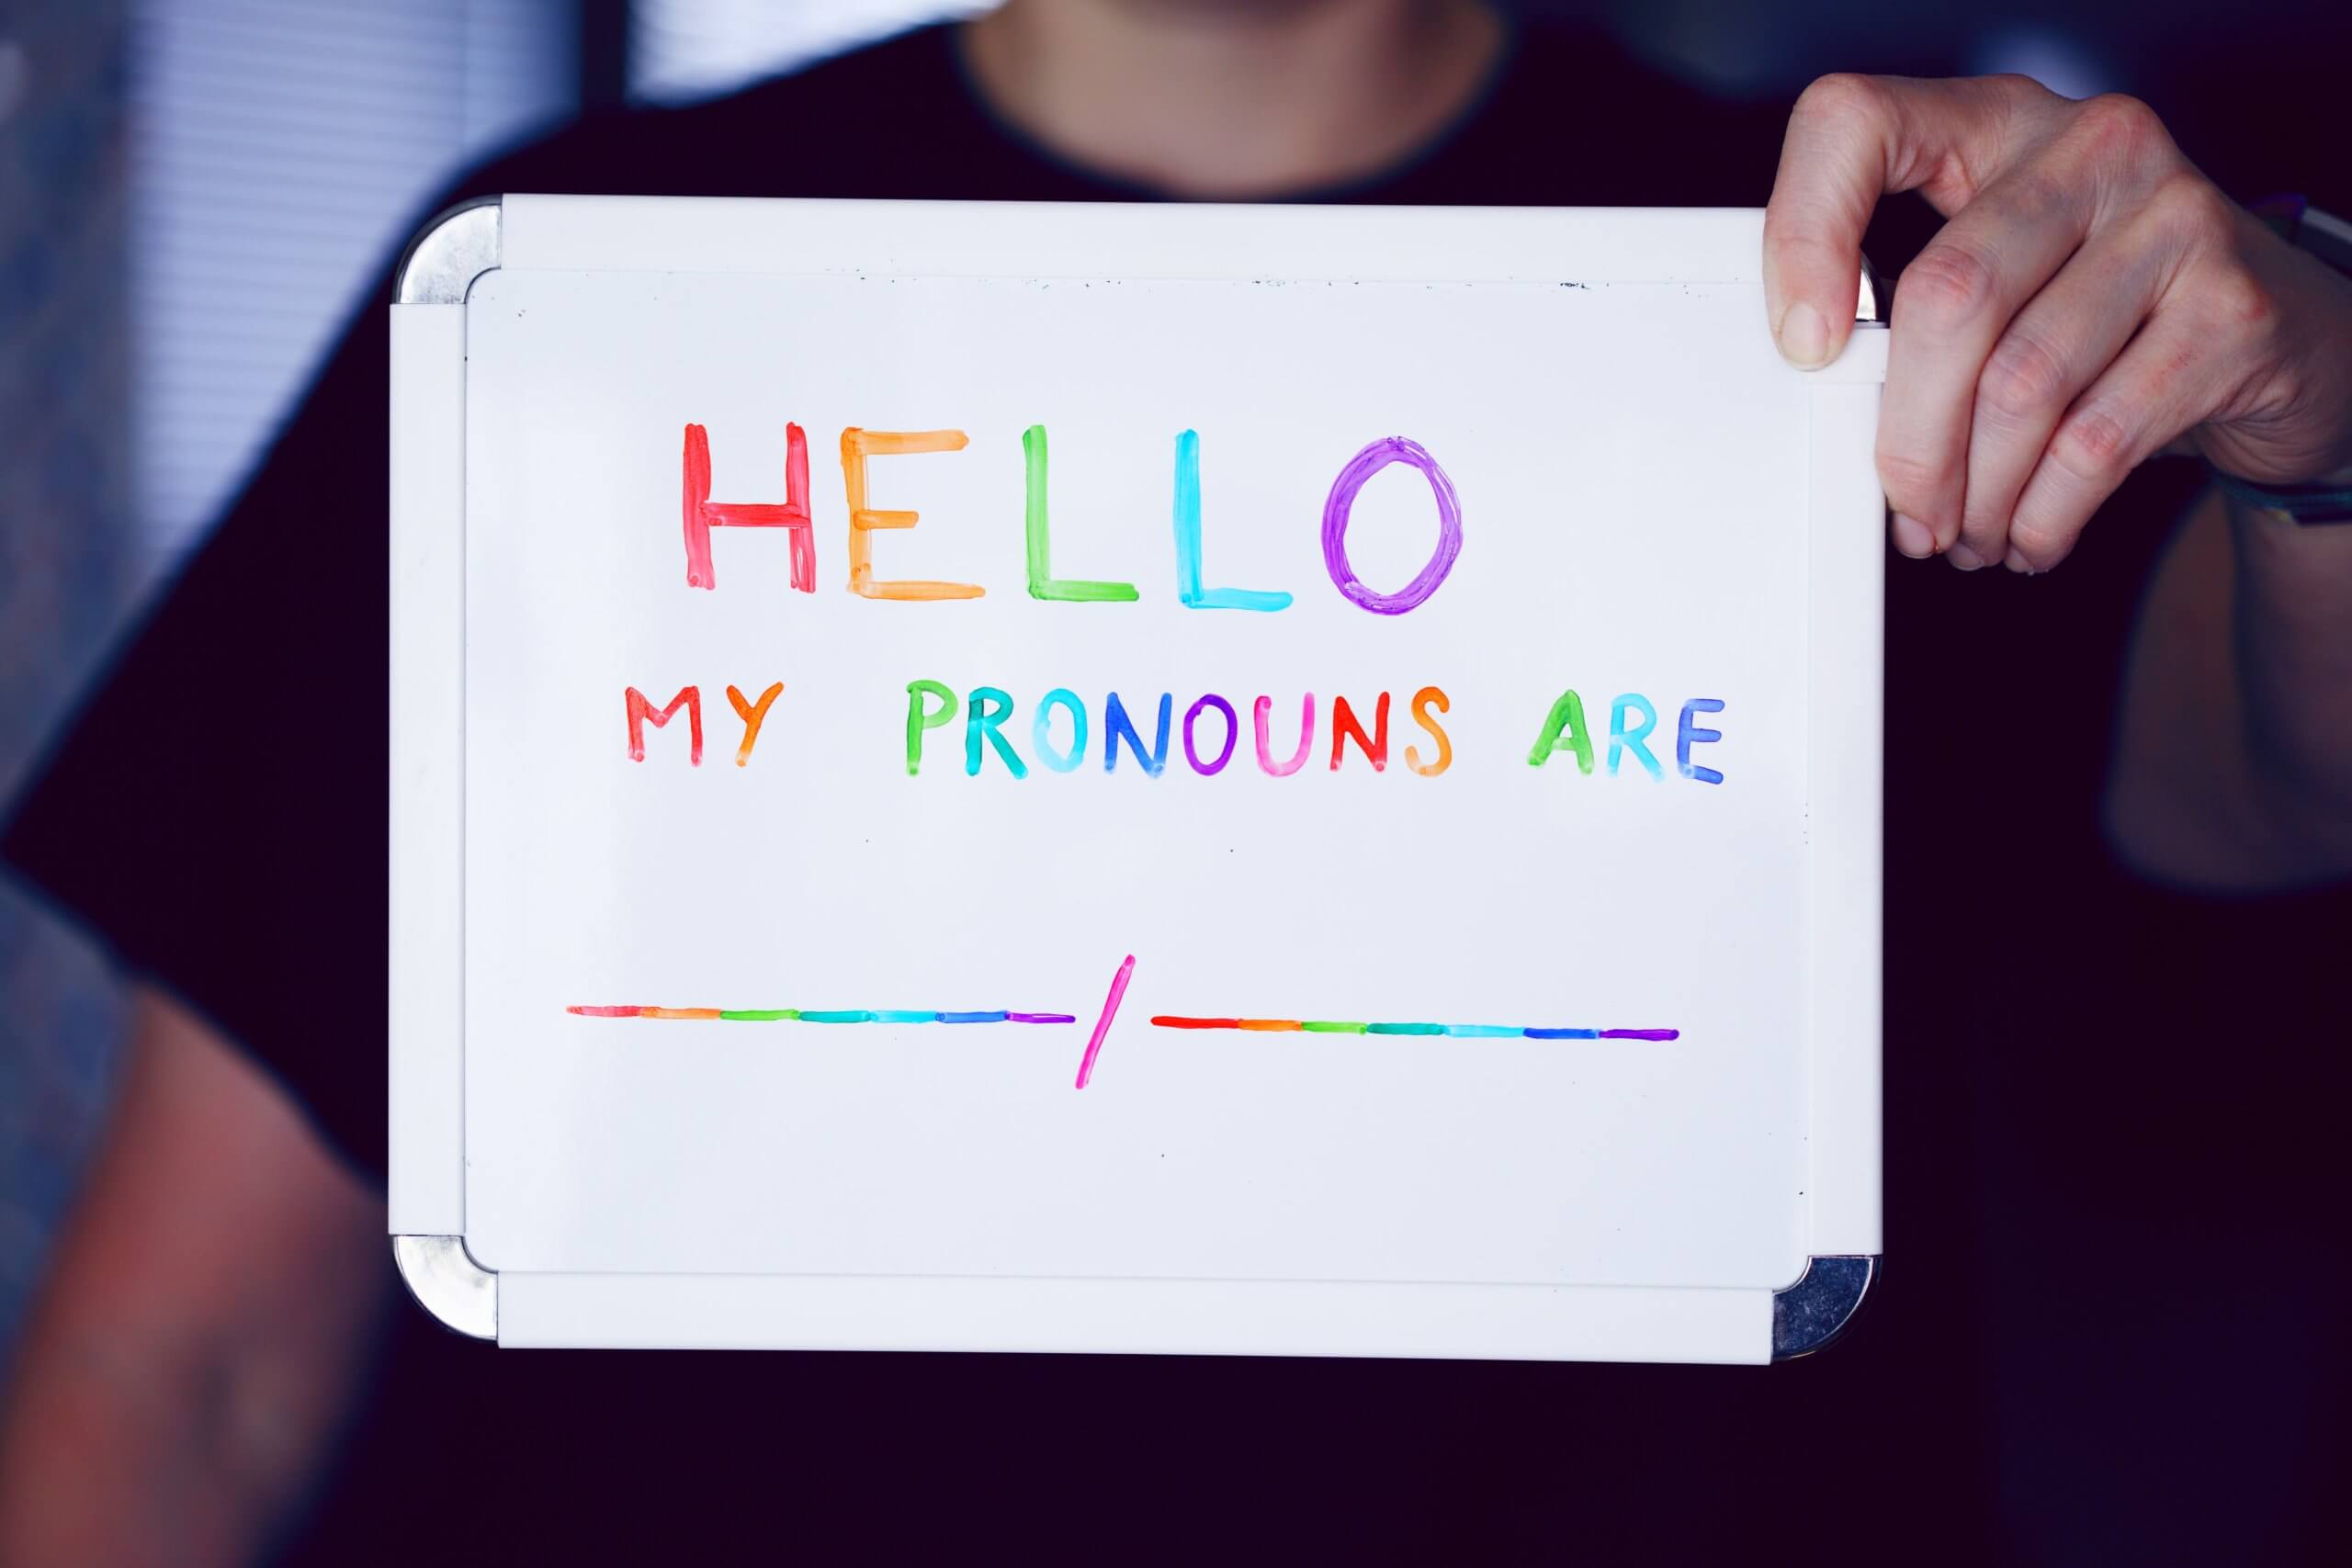 Whiteboard inscribed with text inviting persons to declare pronouns